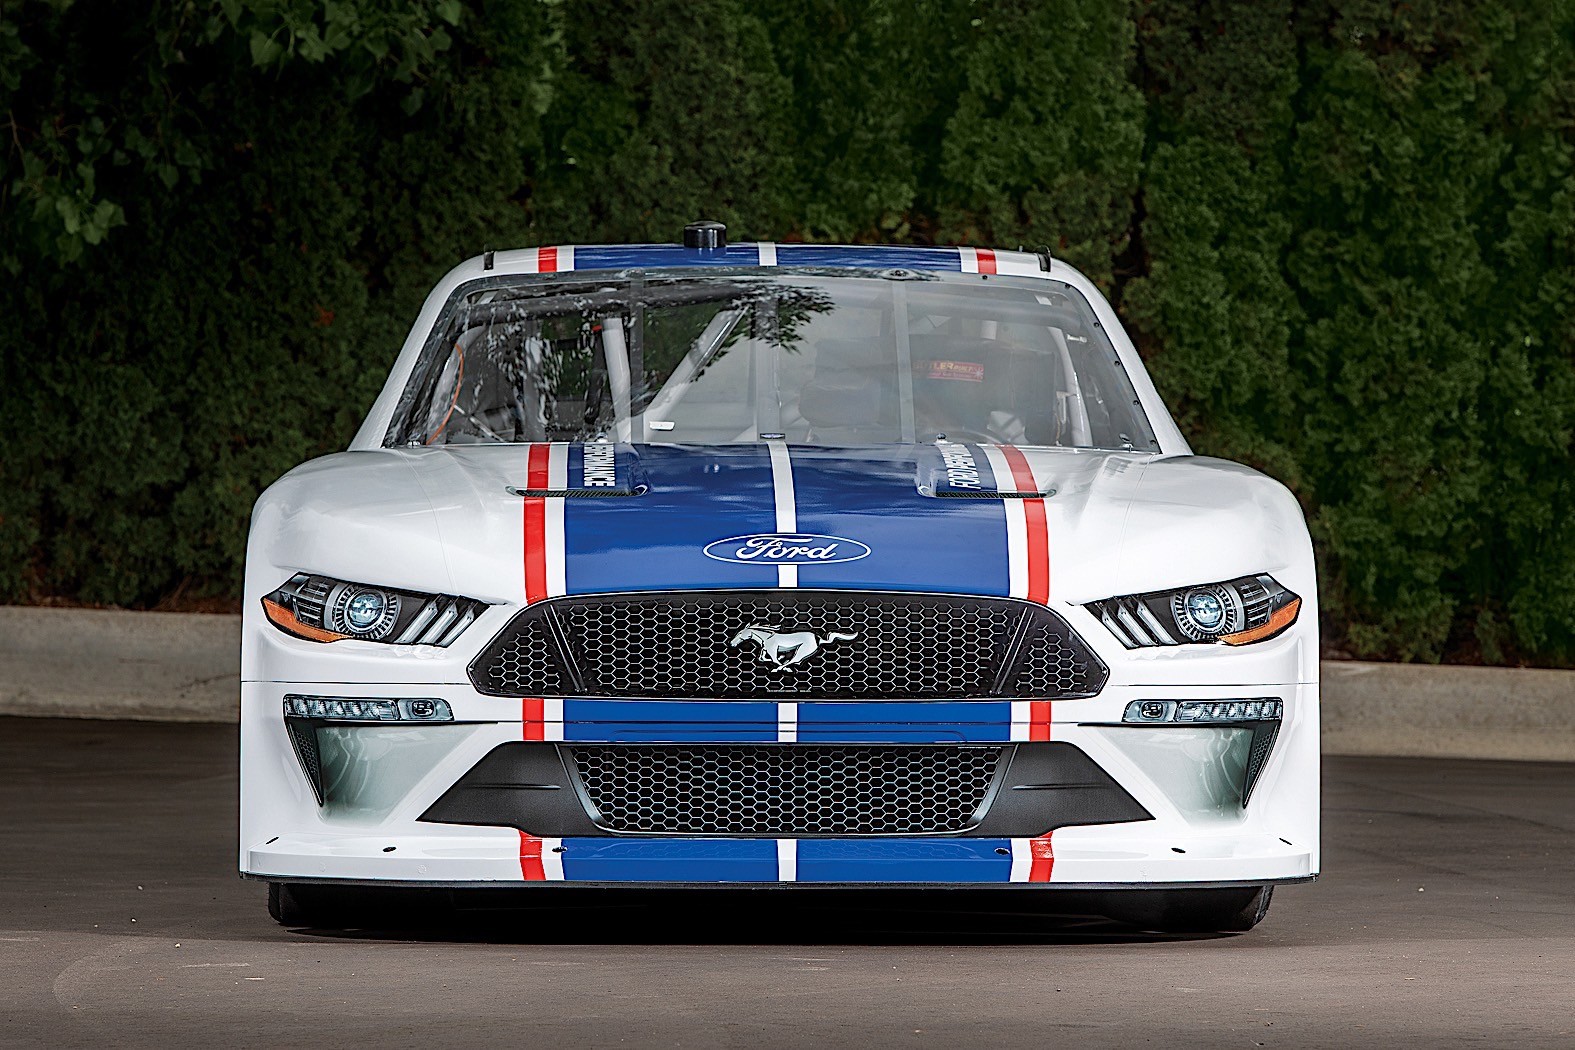 New Ford Mustang Nascar Xfinity Series Unveiled Race Debut In February